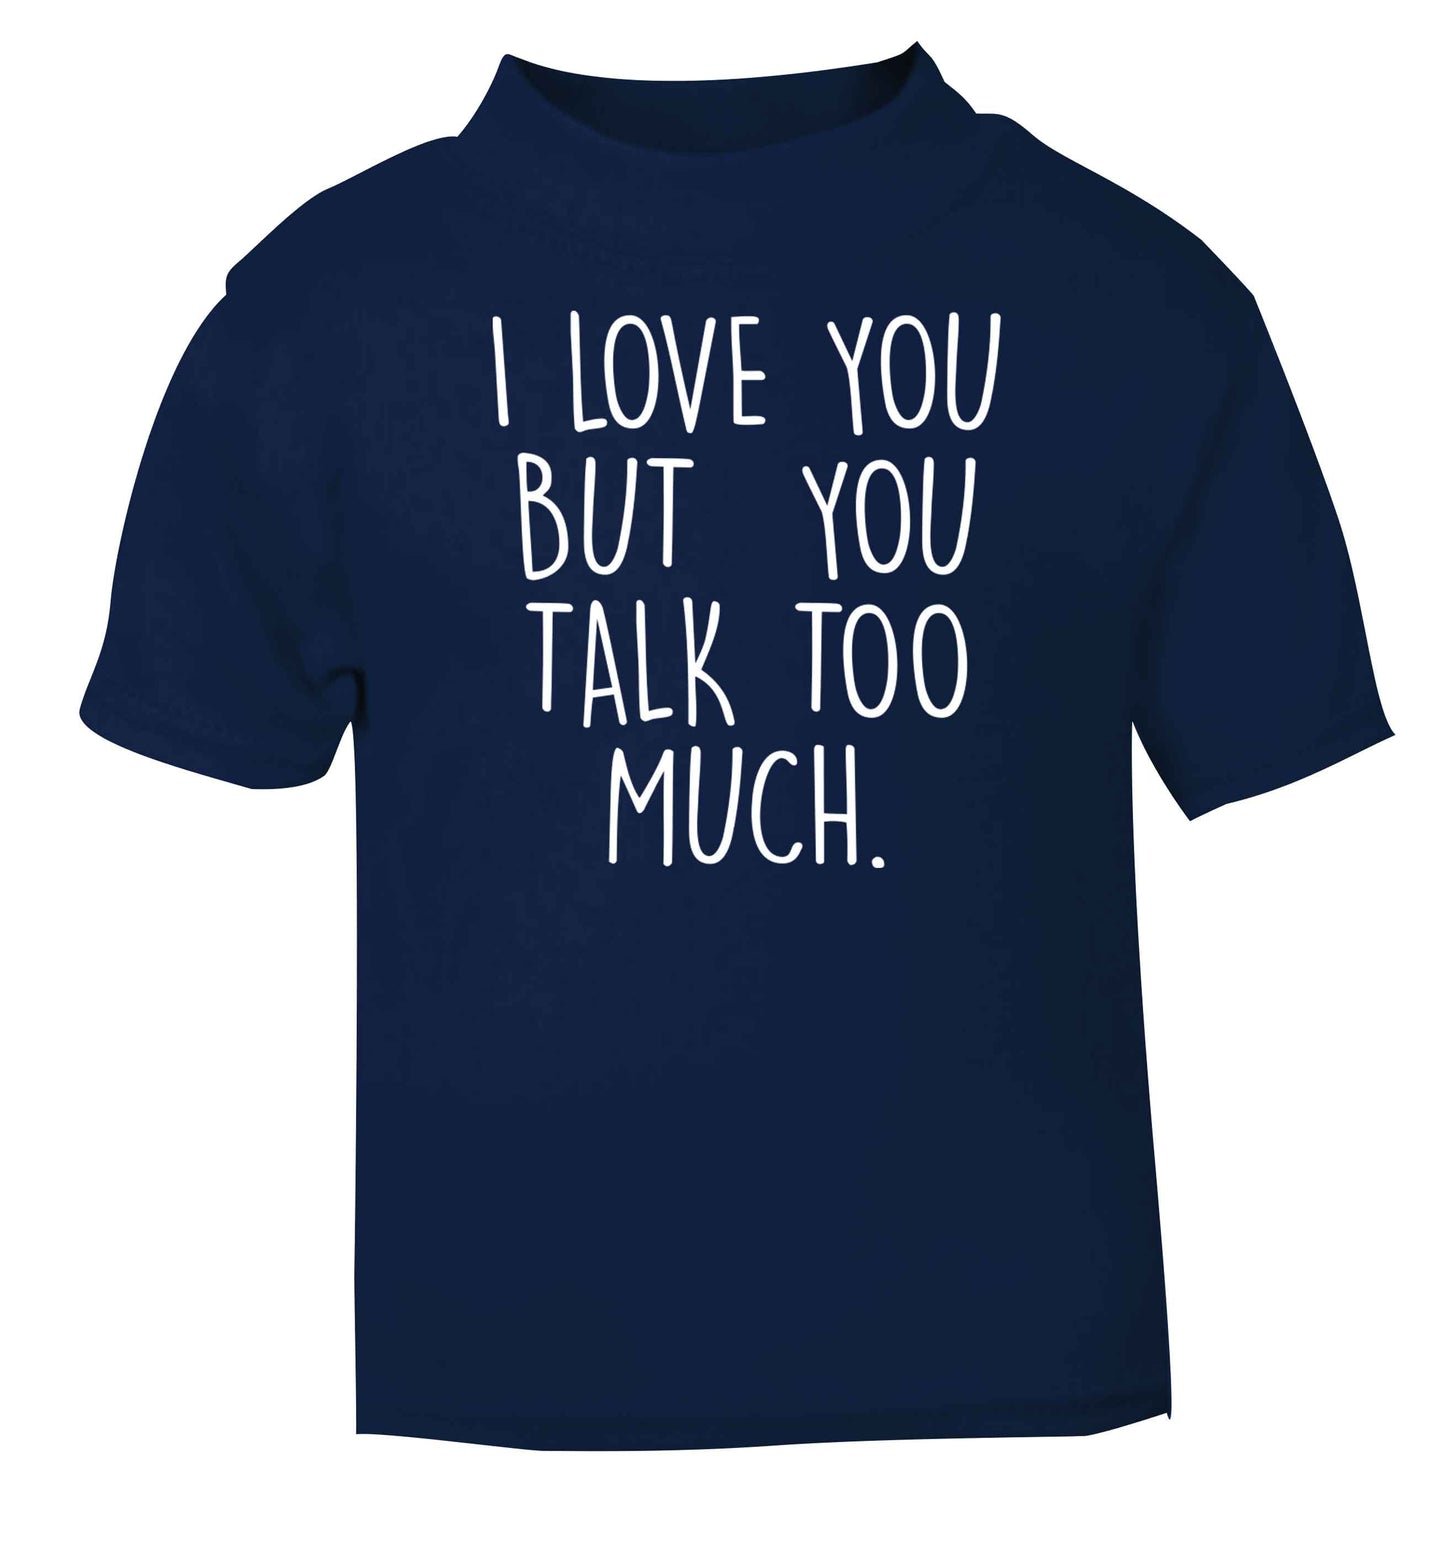 I love you but you talk too much navy baby toddler Tshirt 2 Years